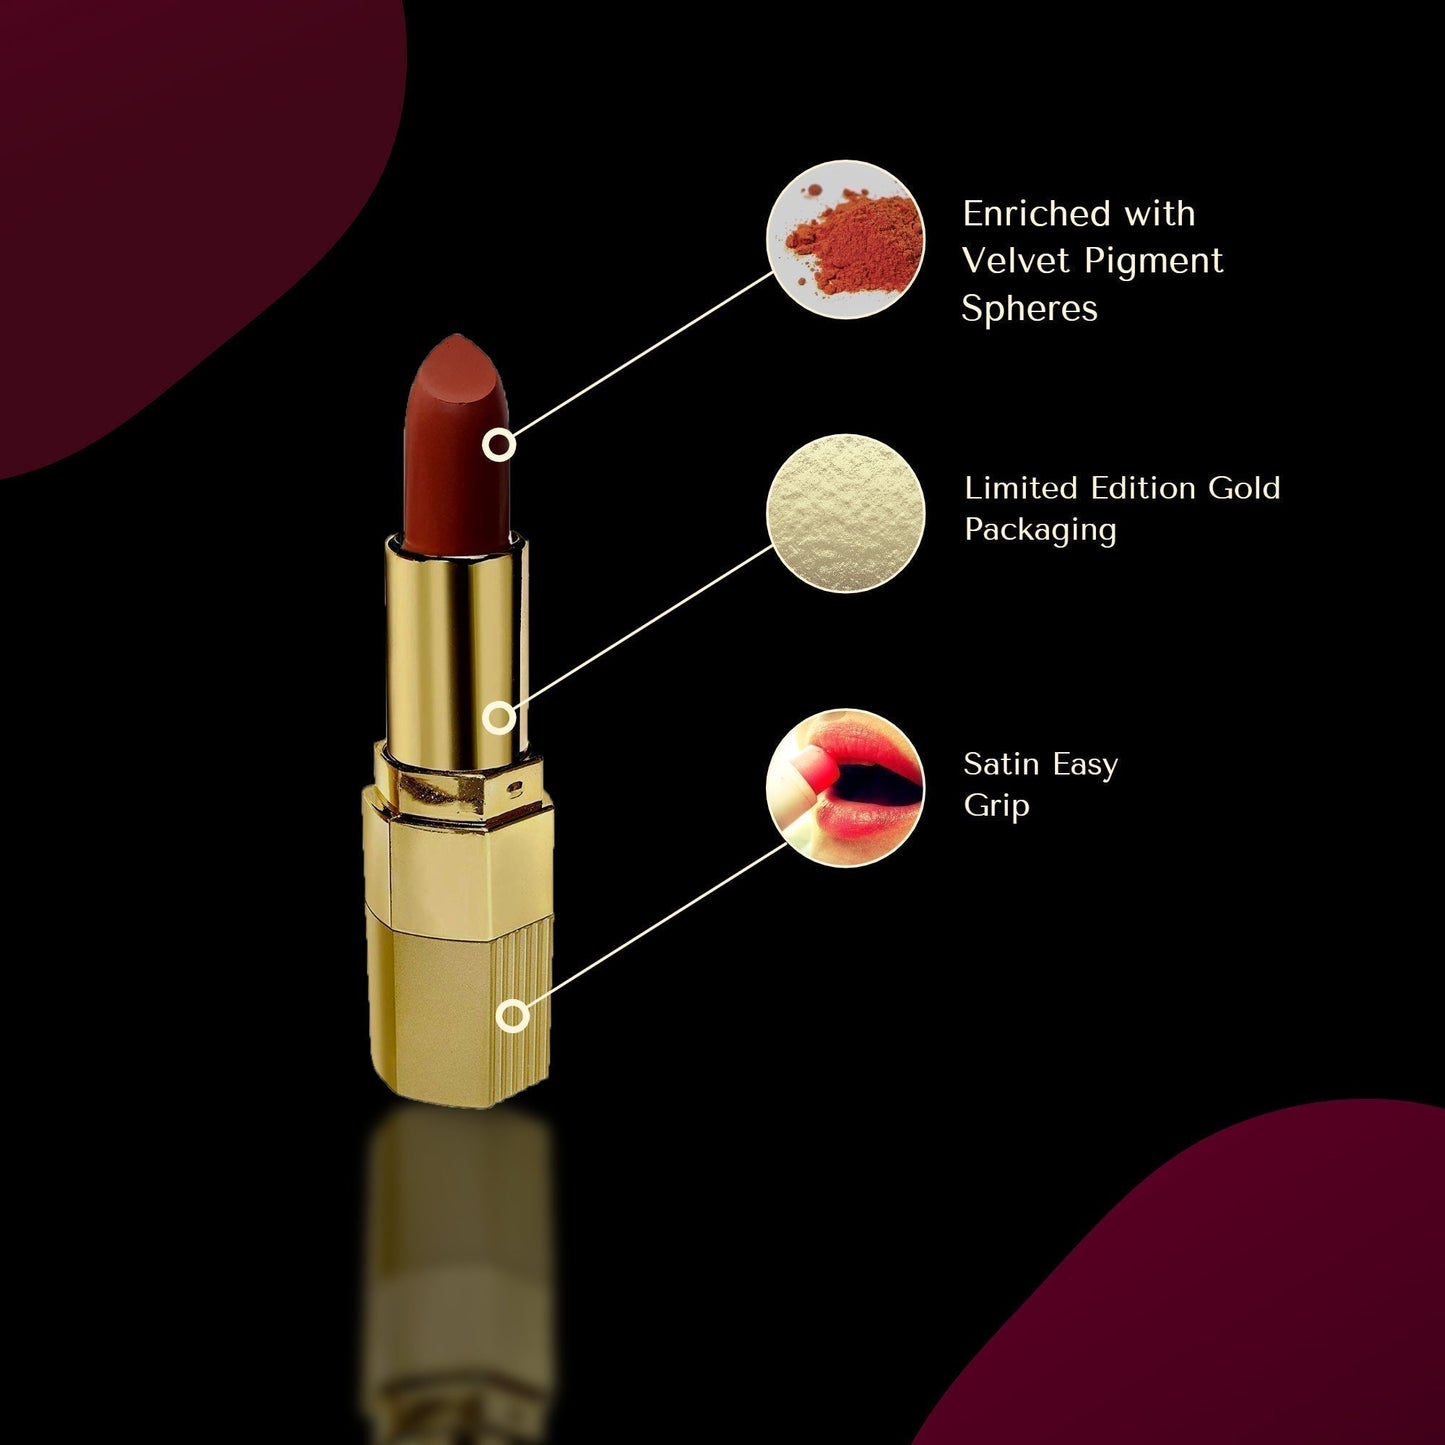 Krayons Desire Matte Lipstick, Highly Pigmented, Longlasting, 3.5g Each, Combo, Pack of 2 (Nude Caramel, Cherry Love)